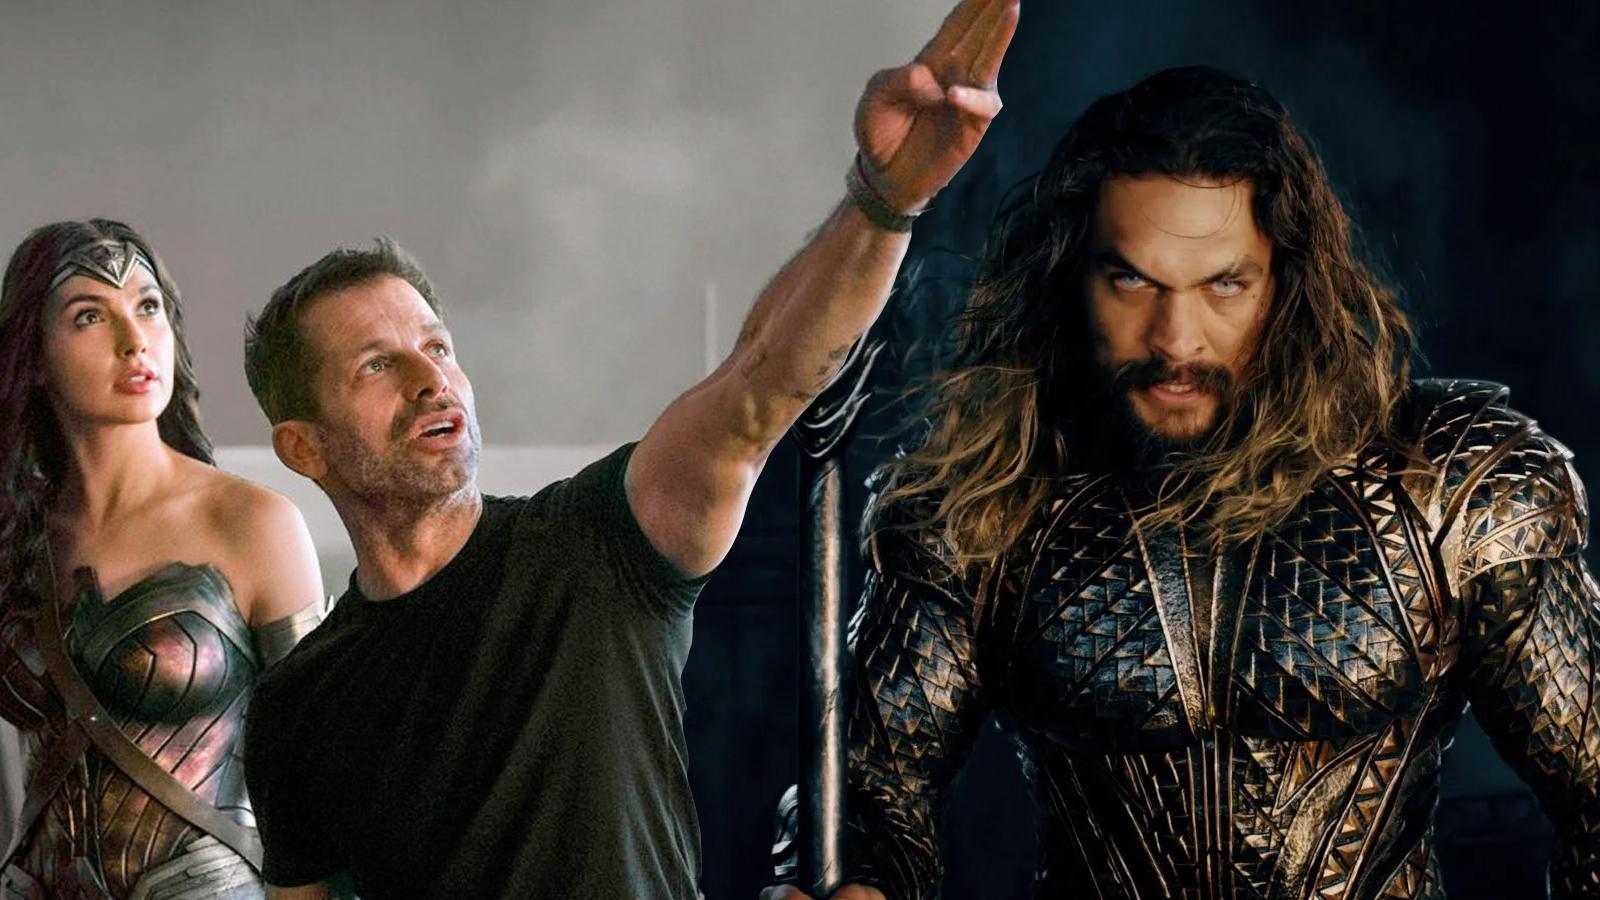 Zack Snyder directing Justice League and Jason Momoa as Aquaman